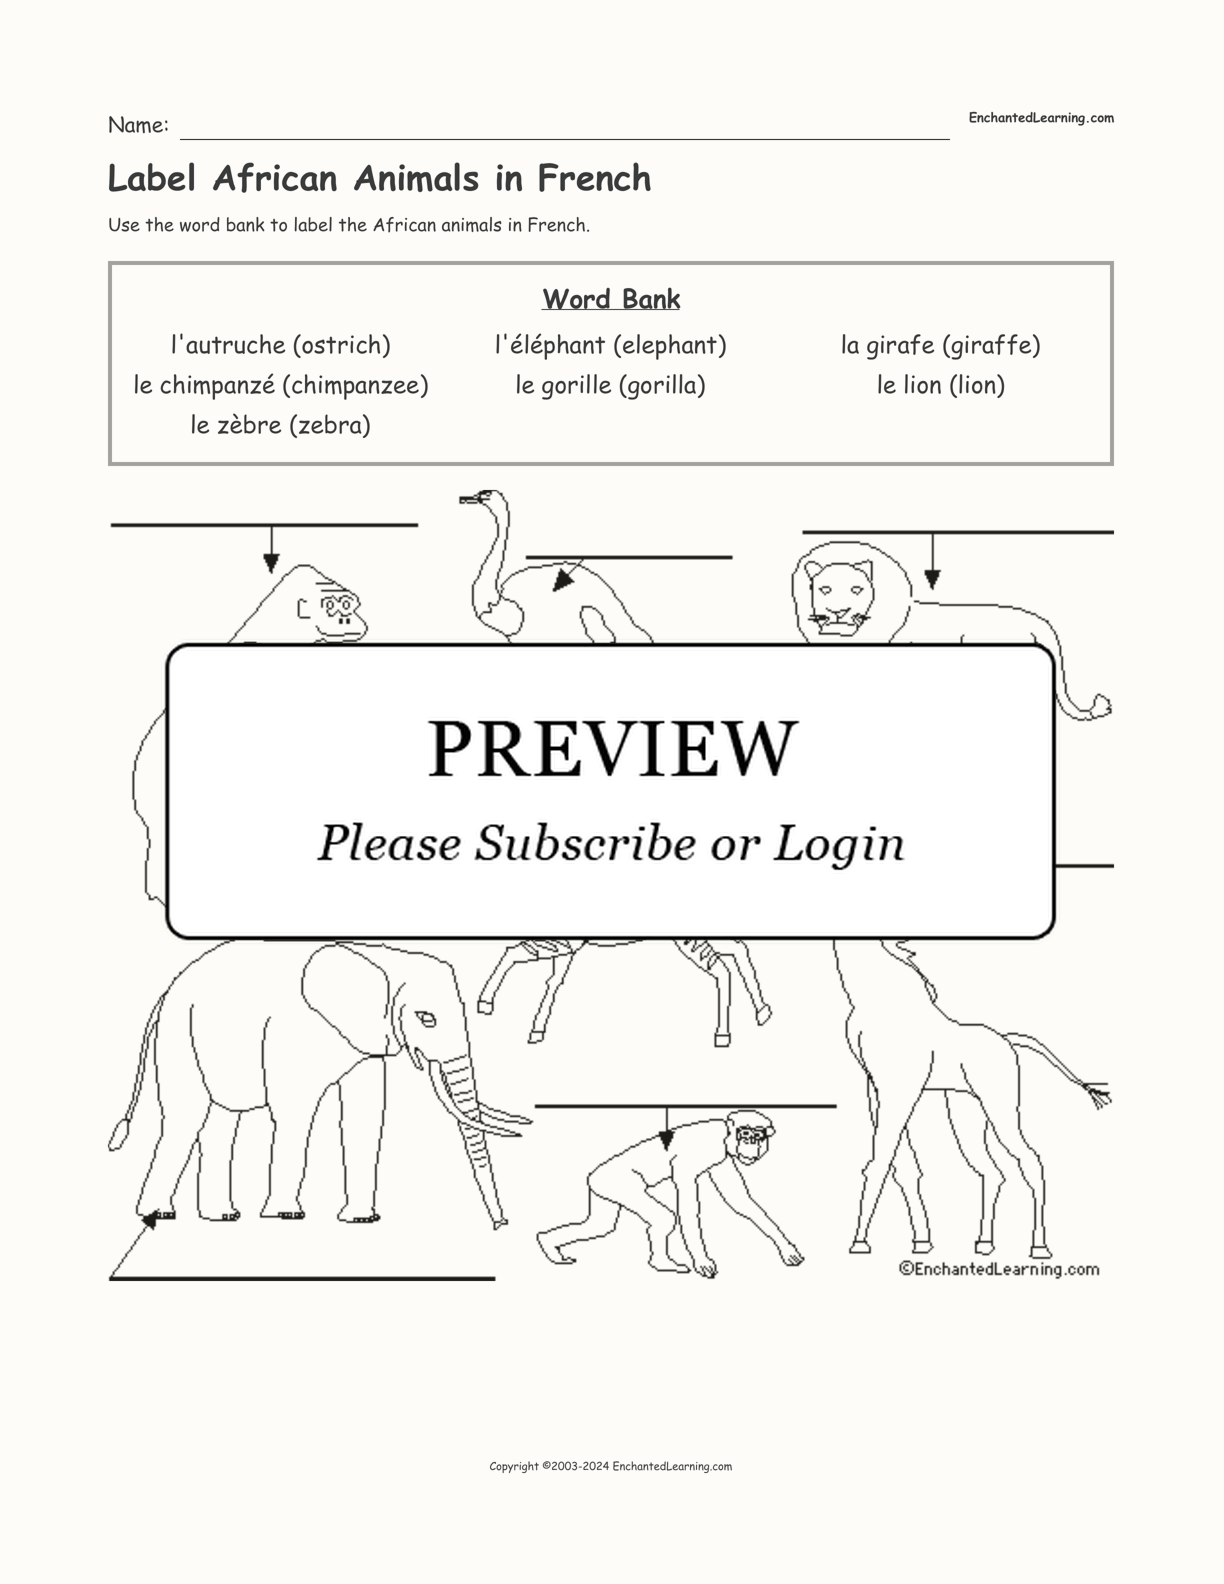 Label African Animals in French interactive worksheet page 1